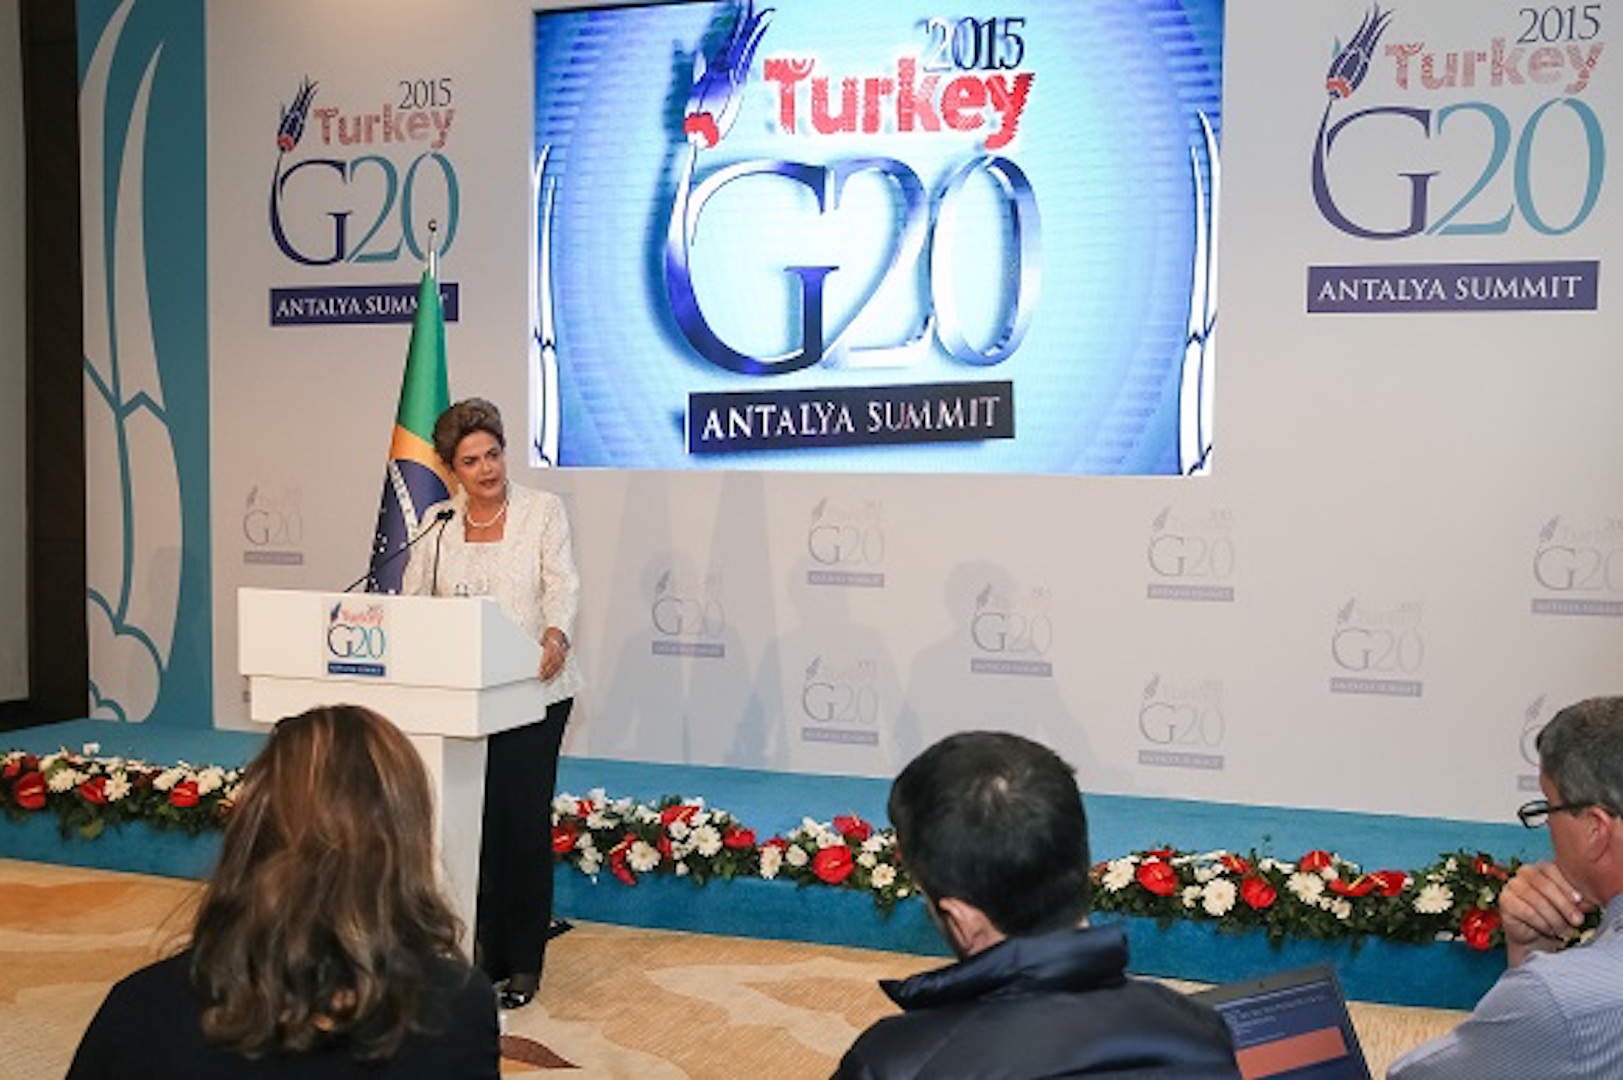 Brazil's President Dilma Rousseff speaks during G-20 Conference being held in Turkey.